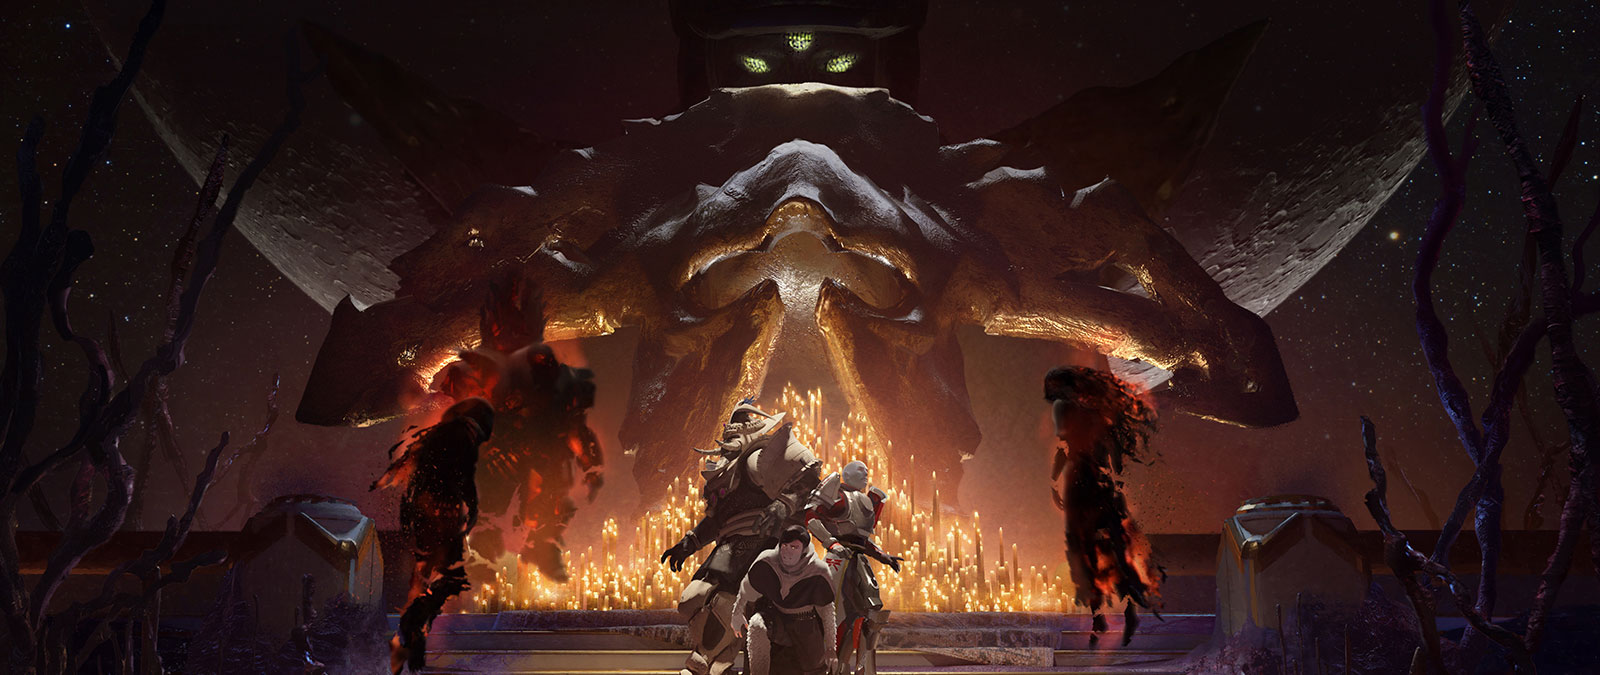 Three Nightmare bosses approach a group of scared players surrounded by lit candles, as The Leviathan watches the in the background. 